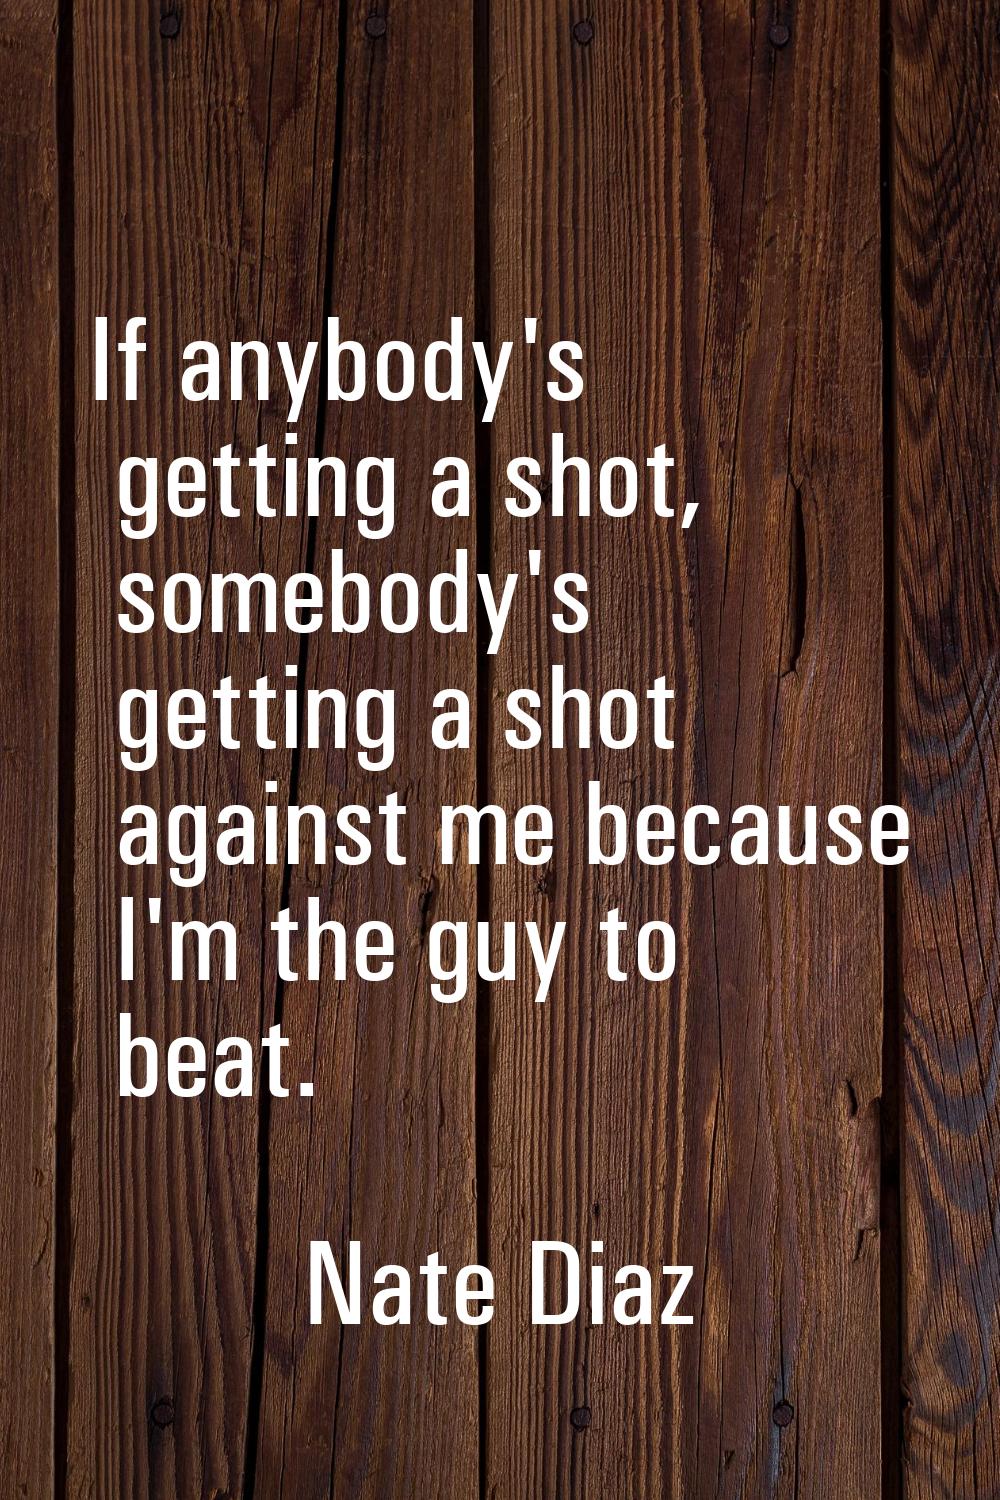 If anybody's getting a shot, somebody's getting a shot against me because I'm the guy to beat.